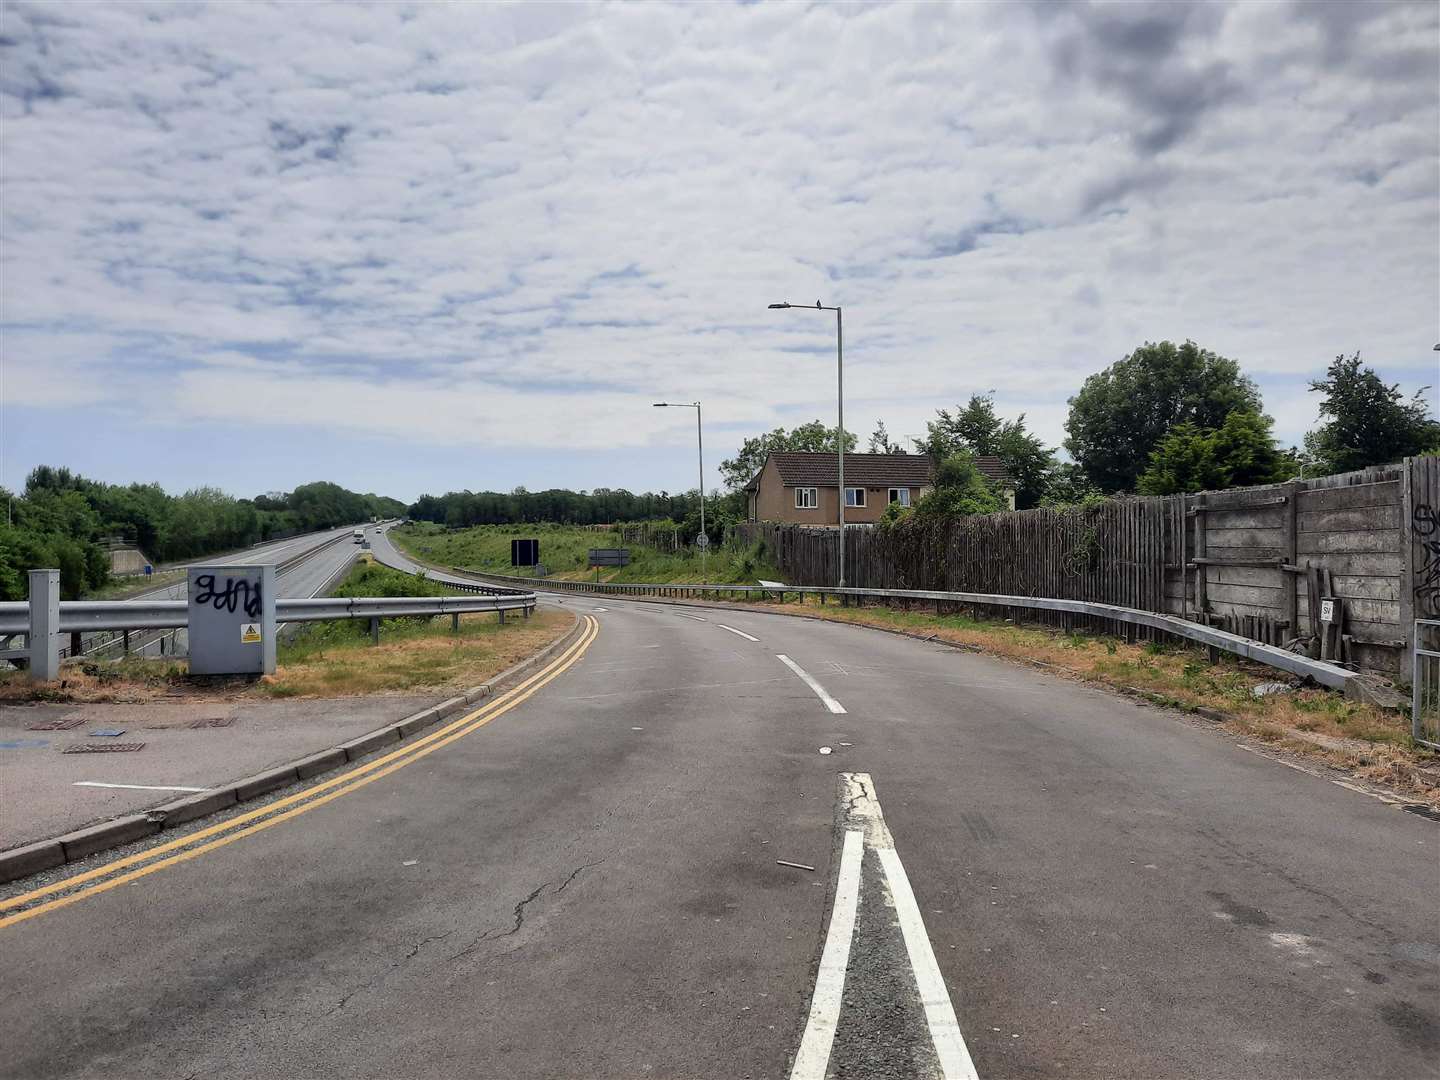 The London-bound slip-road at Wincheap will be widened and extended